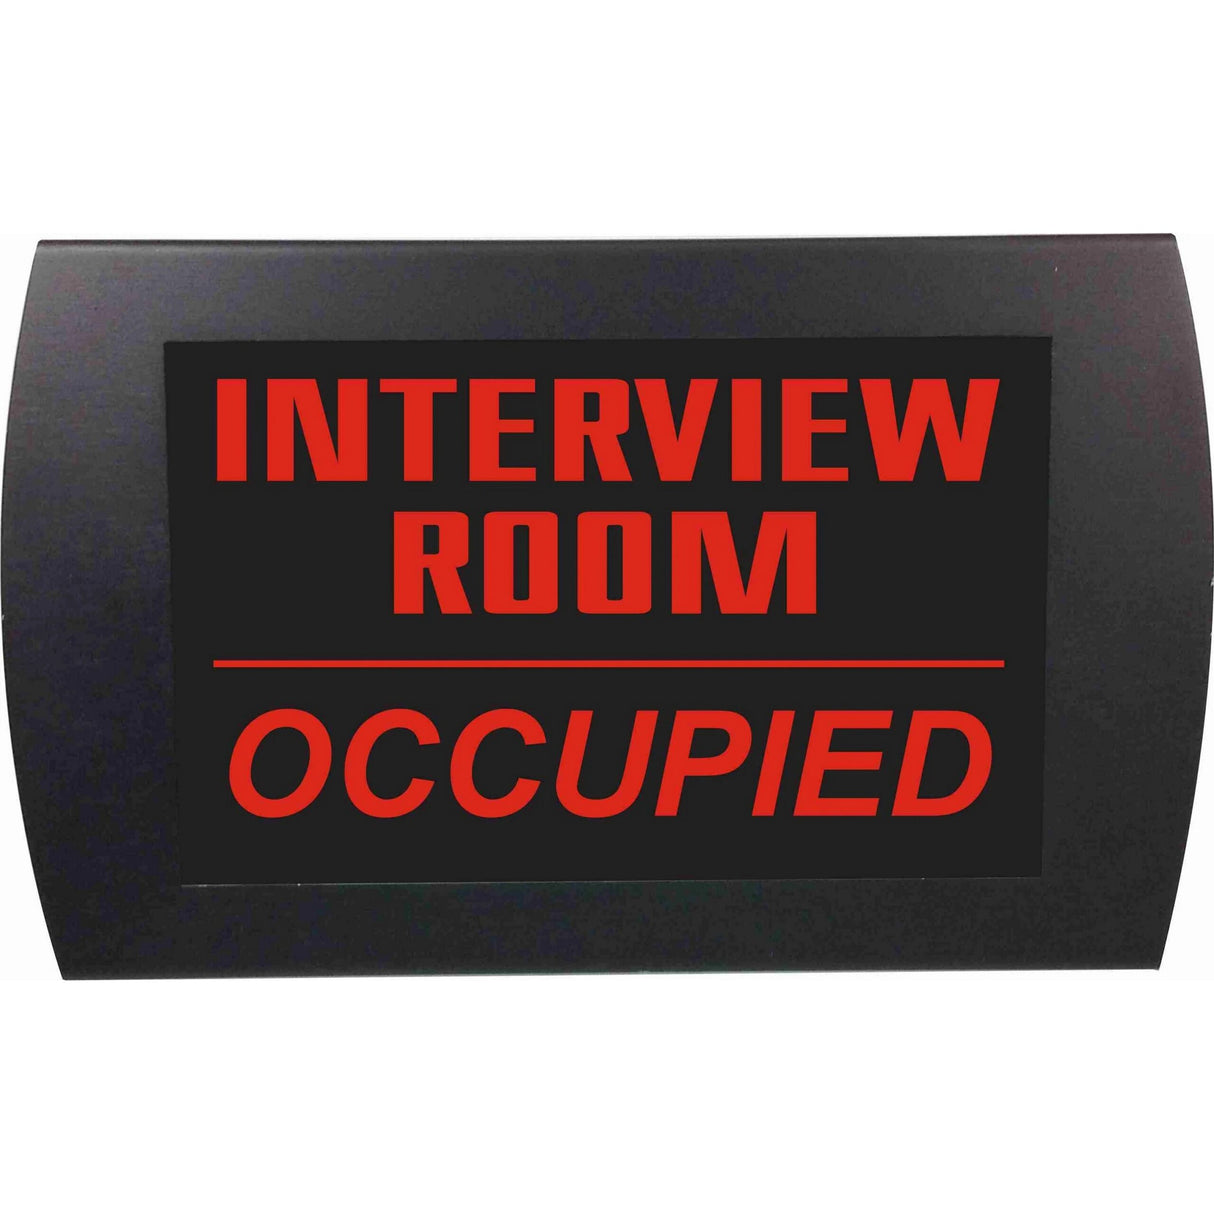 American Recorder Technologies OAS-2055M "INTERVIEW ROOM OCCUPIED" LED Lighted Sign, Red